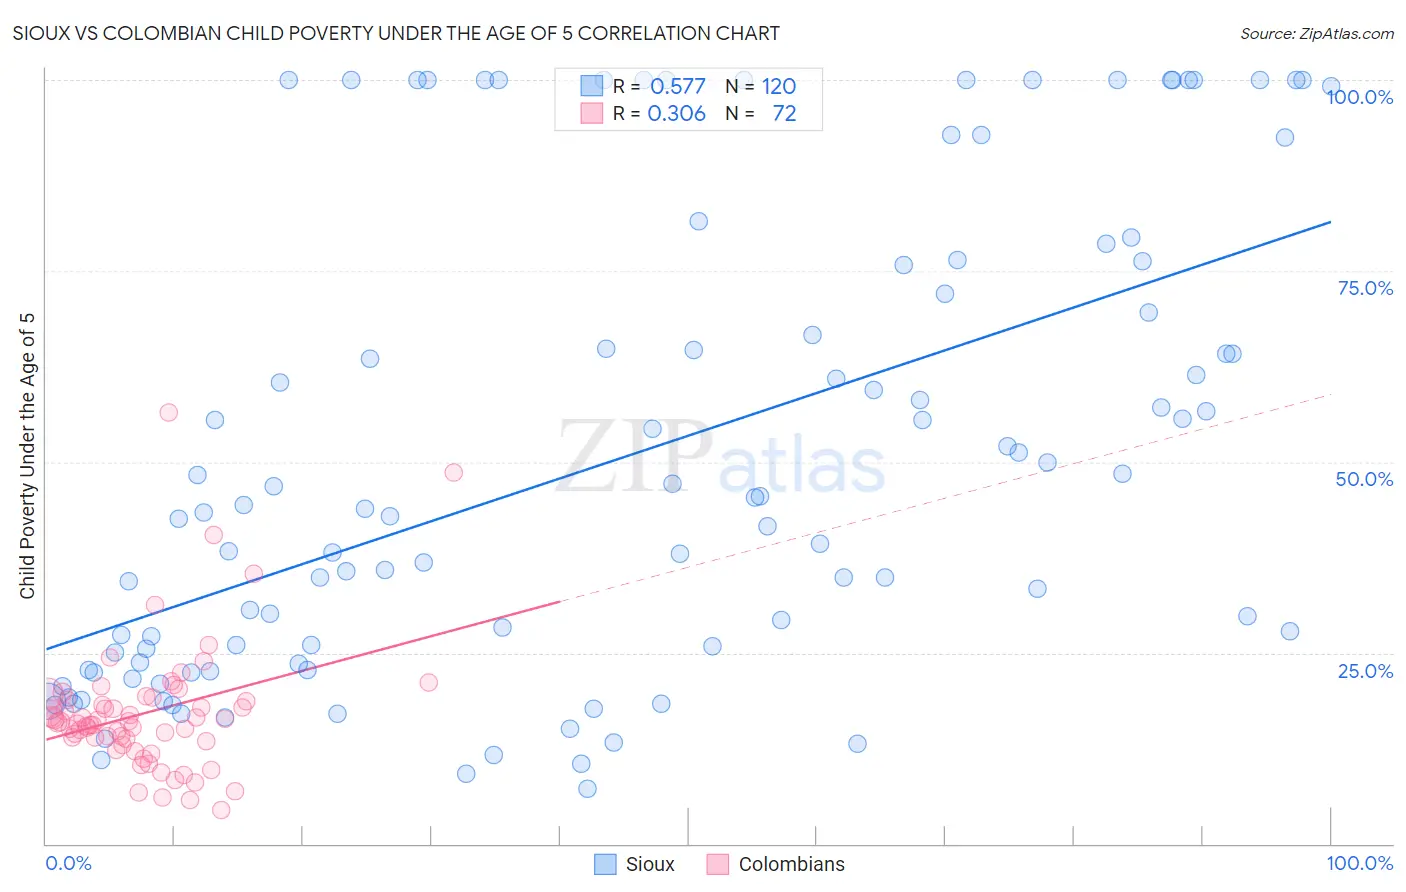 Sioux vs Colombian Child Poverty Under the Age of 5